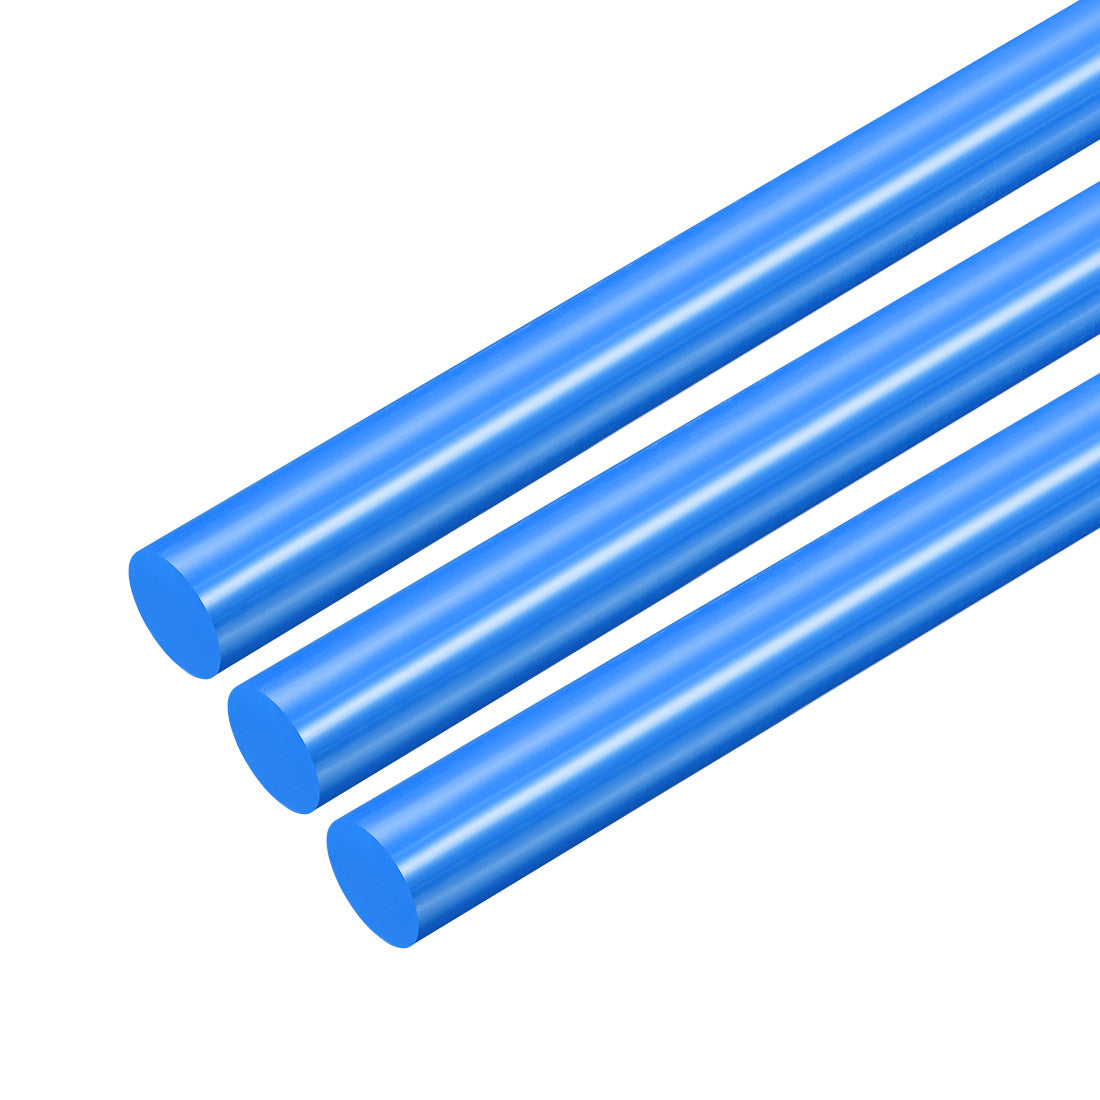 uxcell Uxcell Plastic Round Rod,12mm Dia 50cm Blue Engineering Plastic Round Bar 3pcs